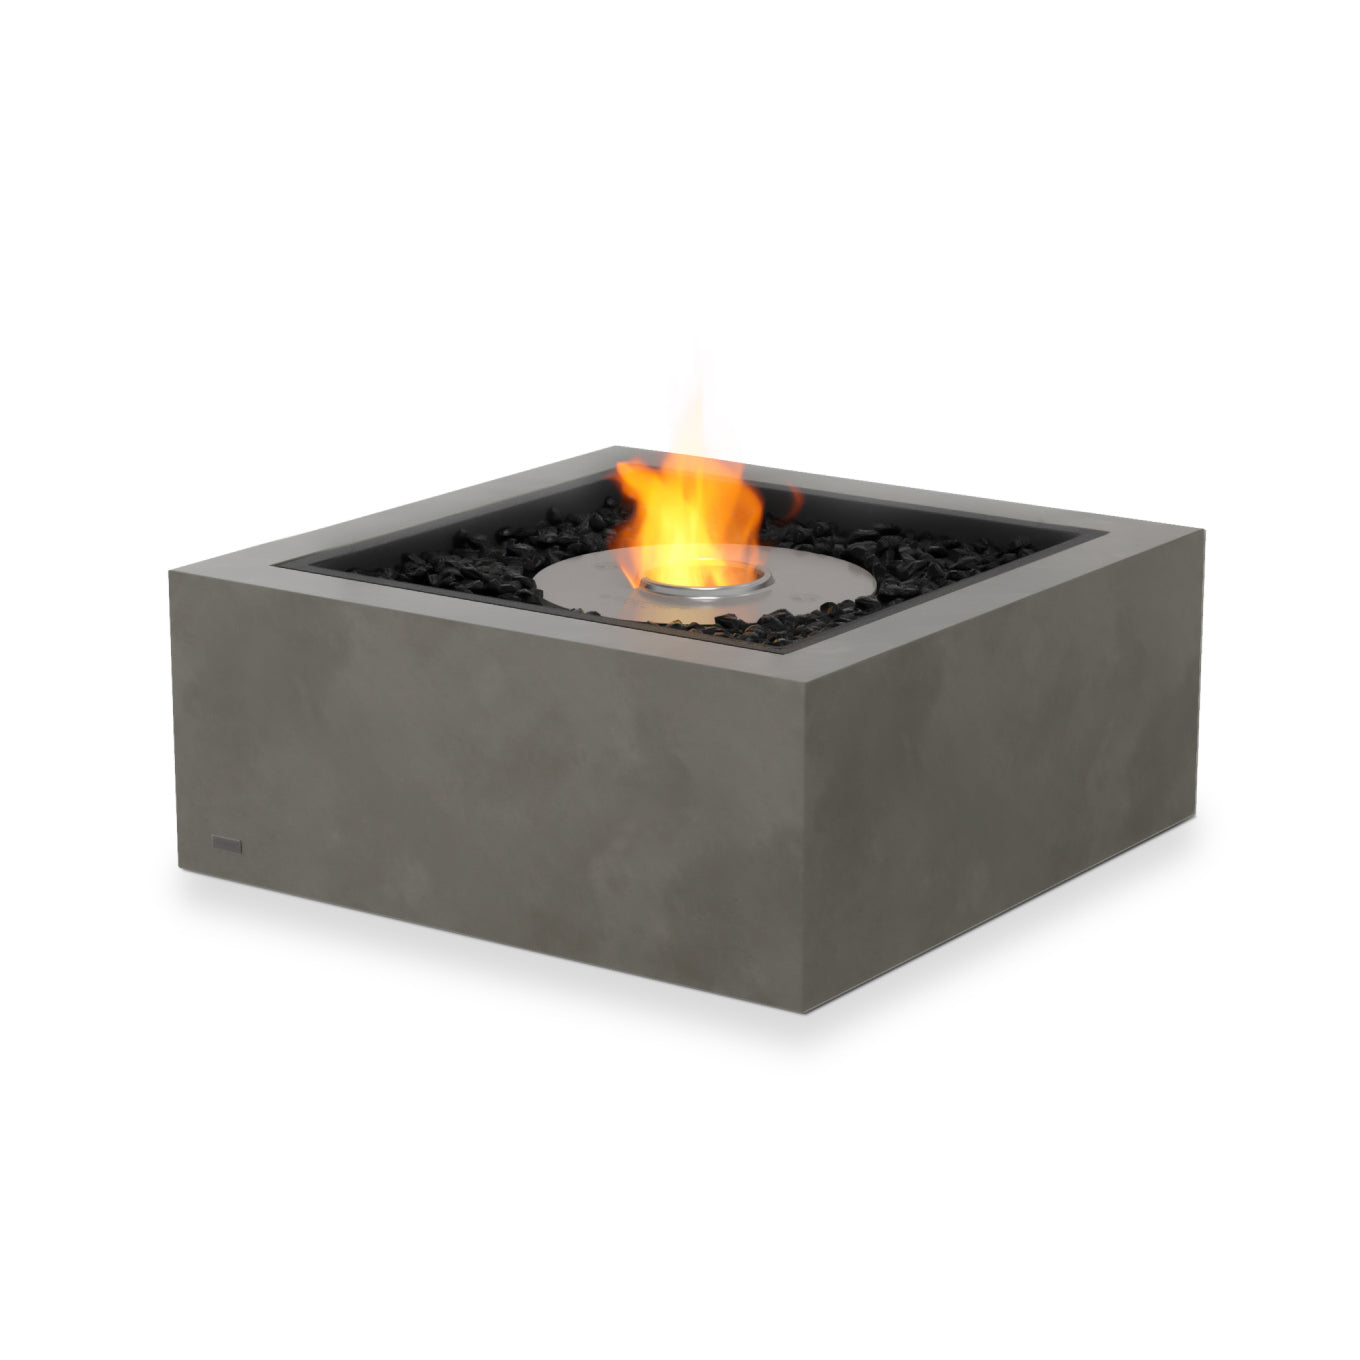 BASE 30 FIRE PIT TABLE - ETHANOL